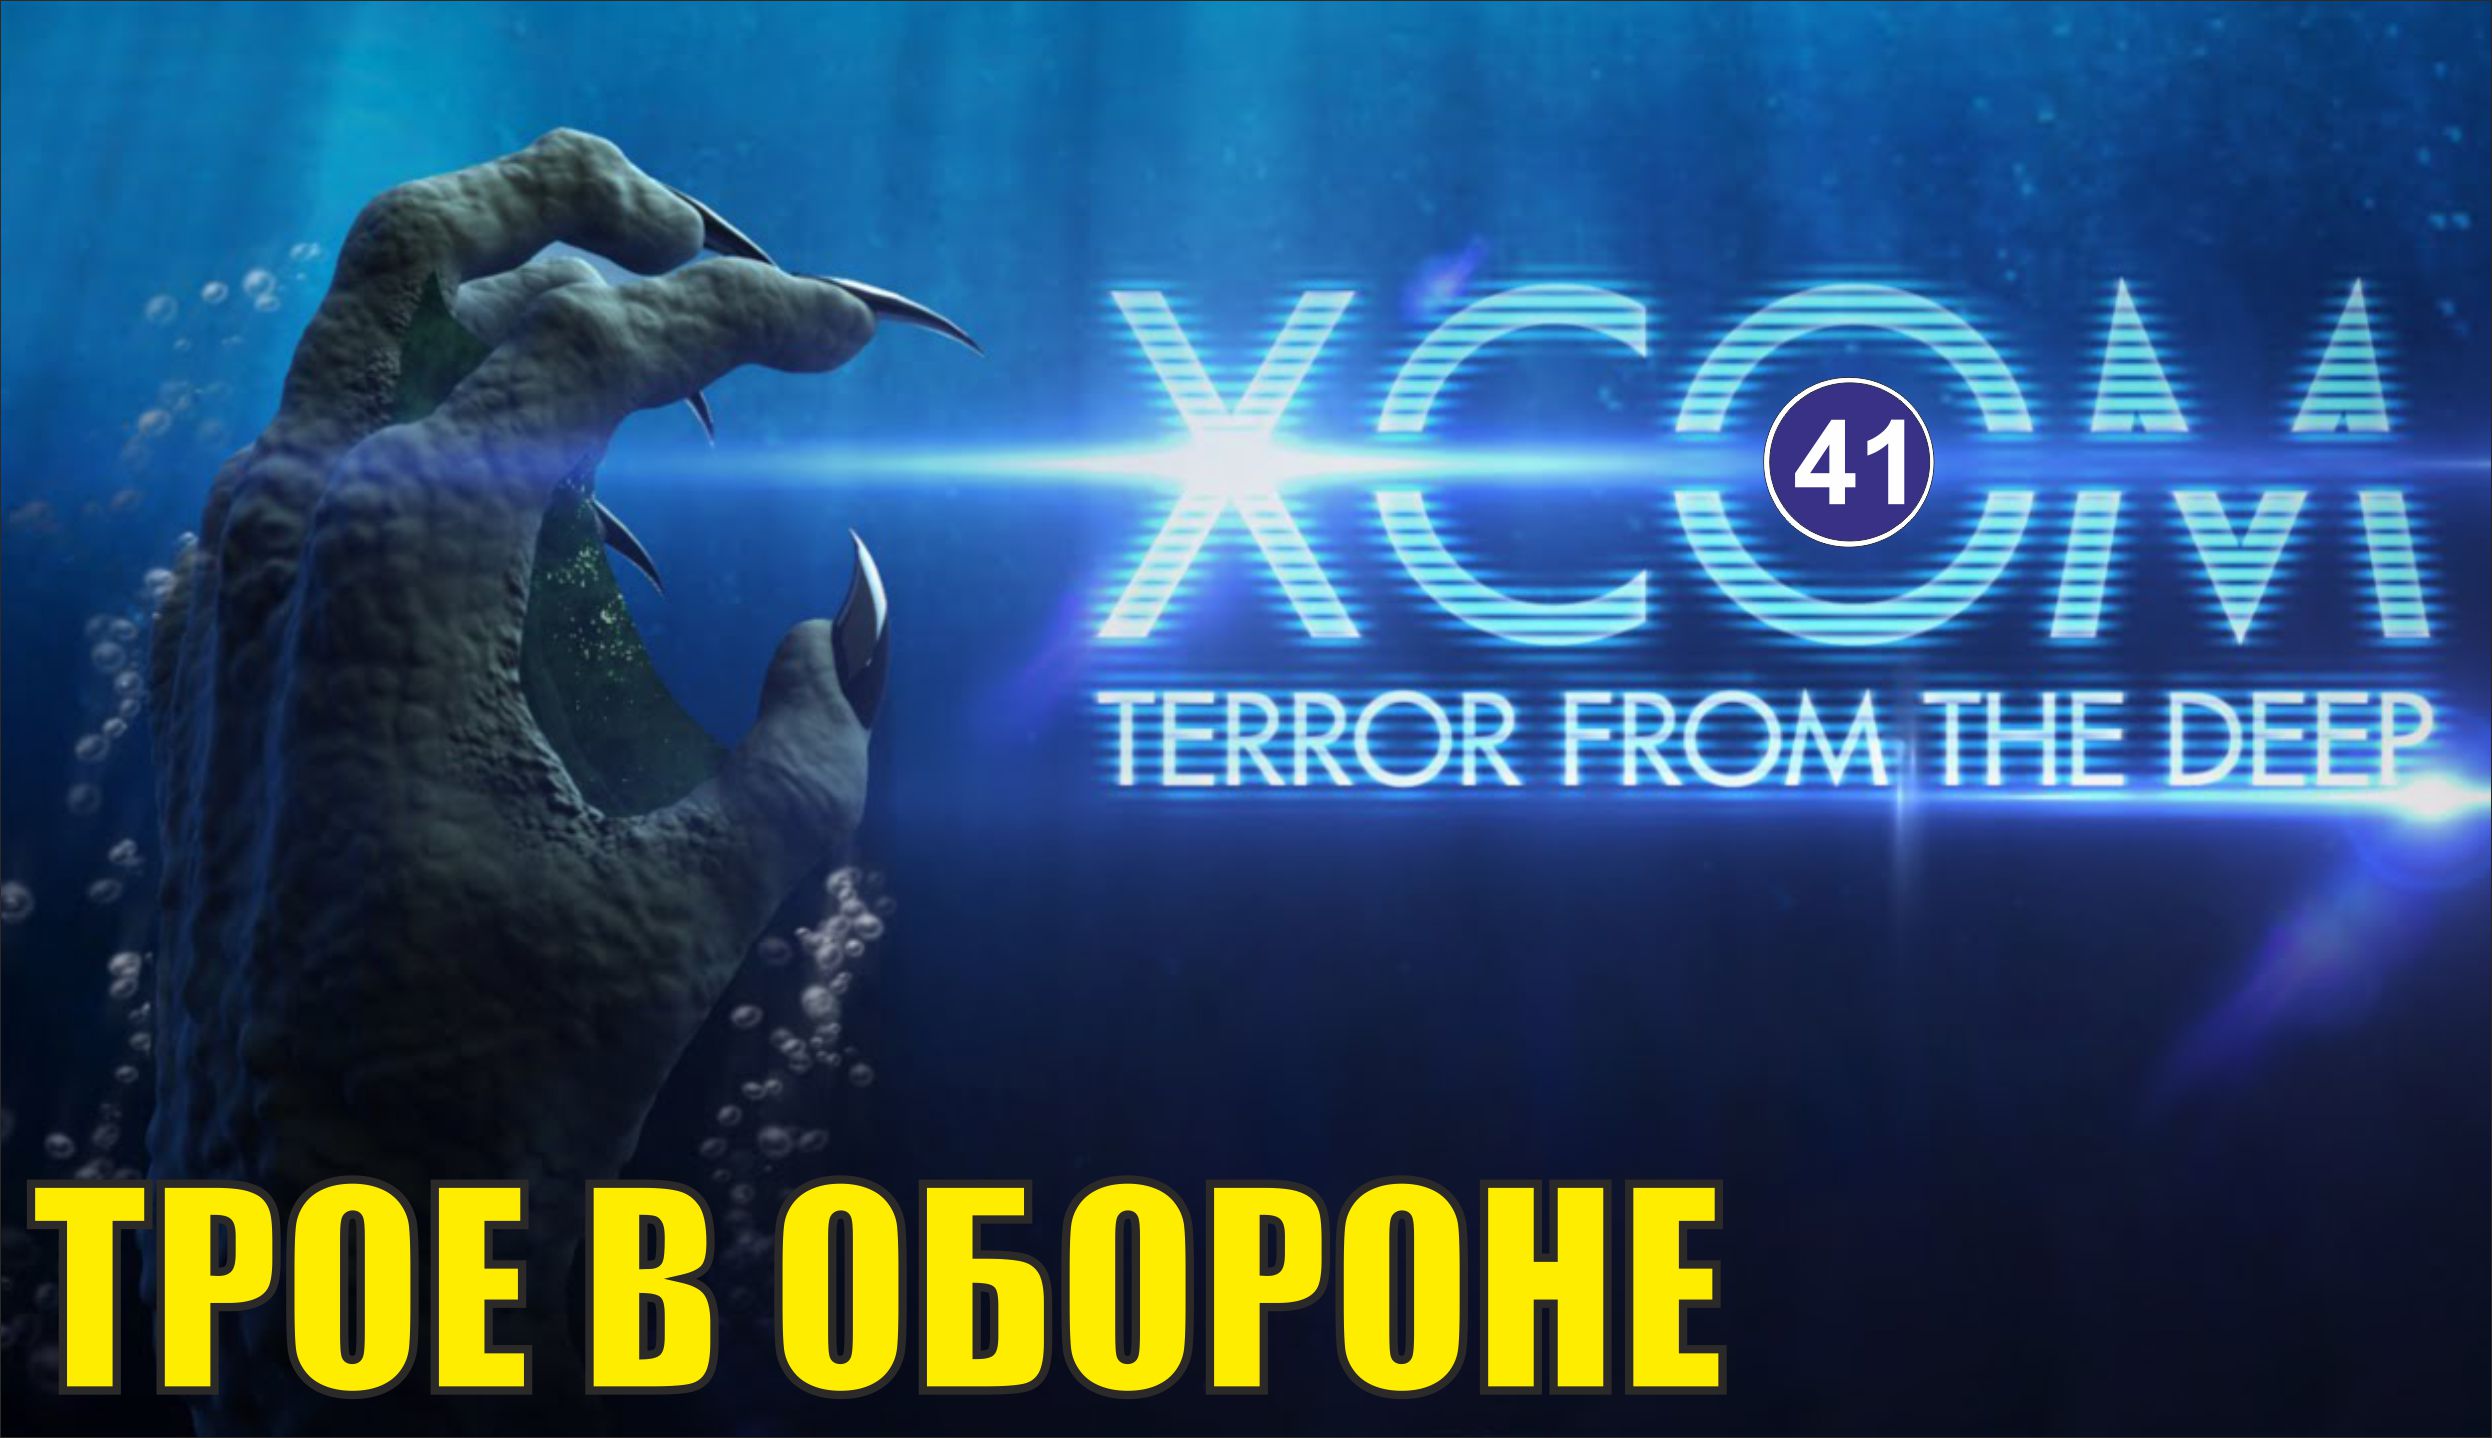 Com terror from the deep. X com Terror from the. X-com : Terror from the Deep. X.com 2 Terror from the Deep. XCOM Terror from the Deep дерево исследований.